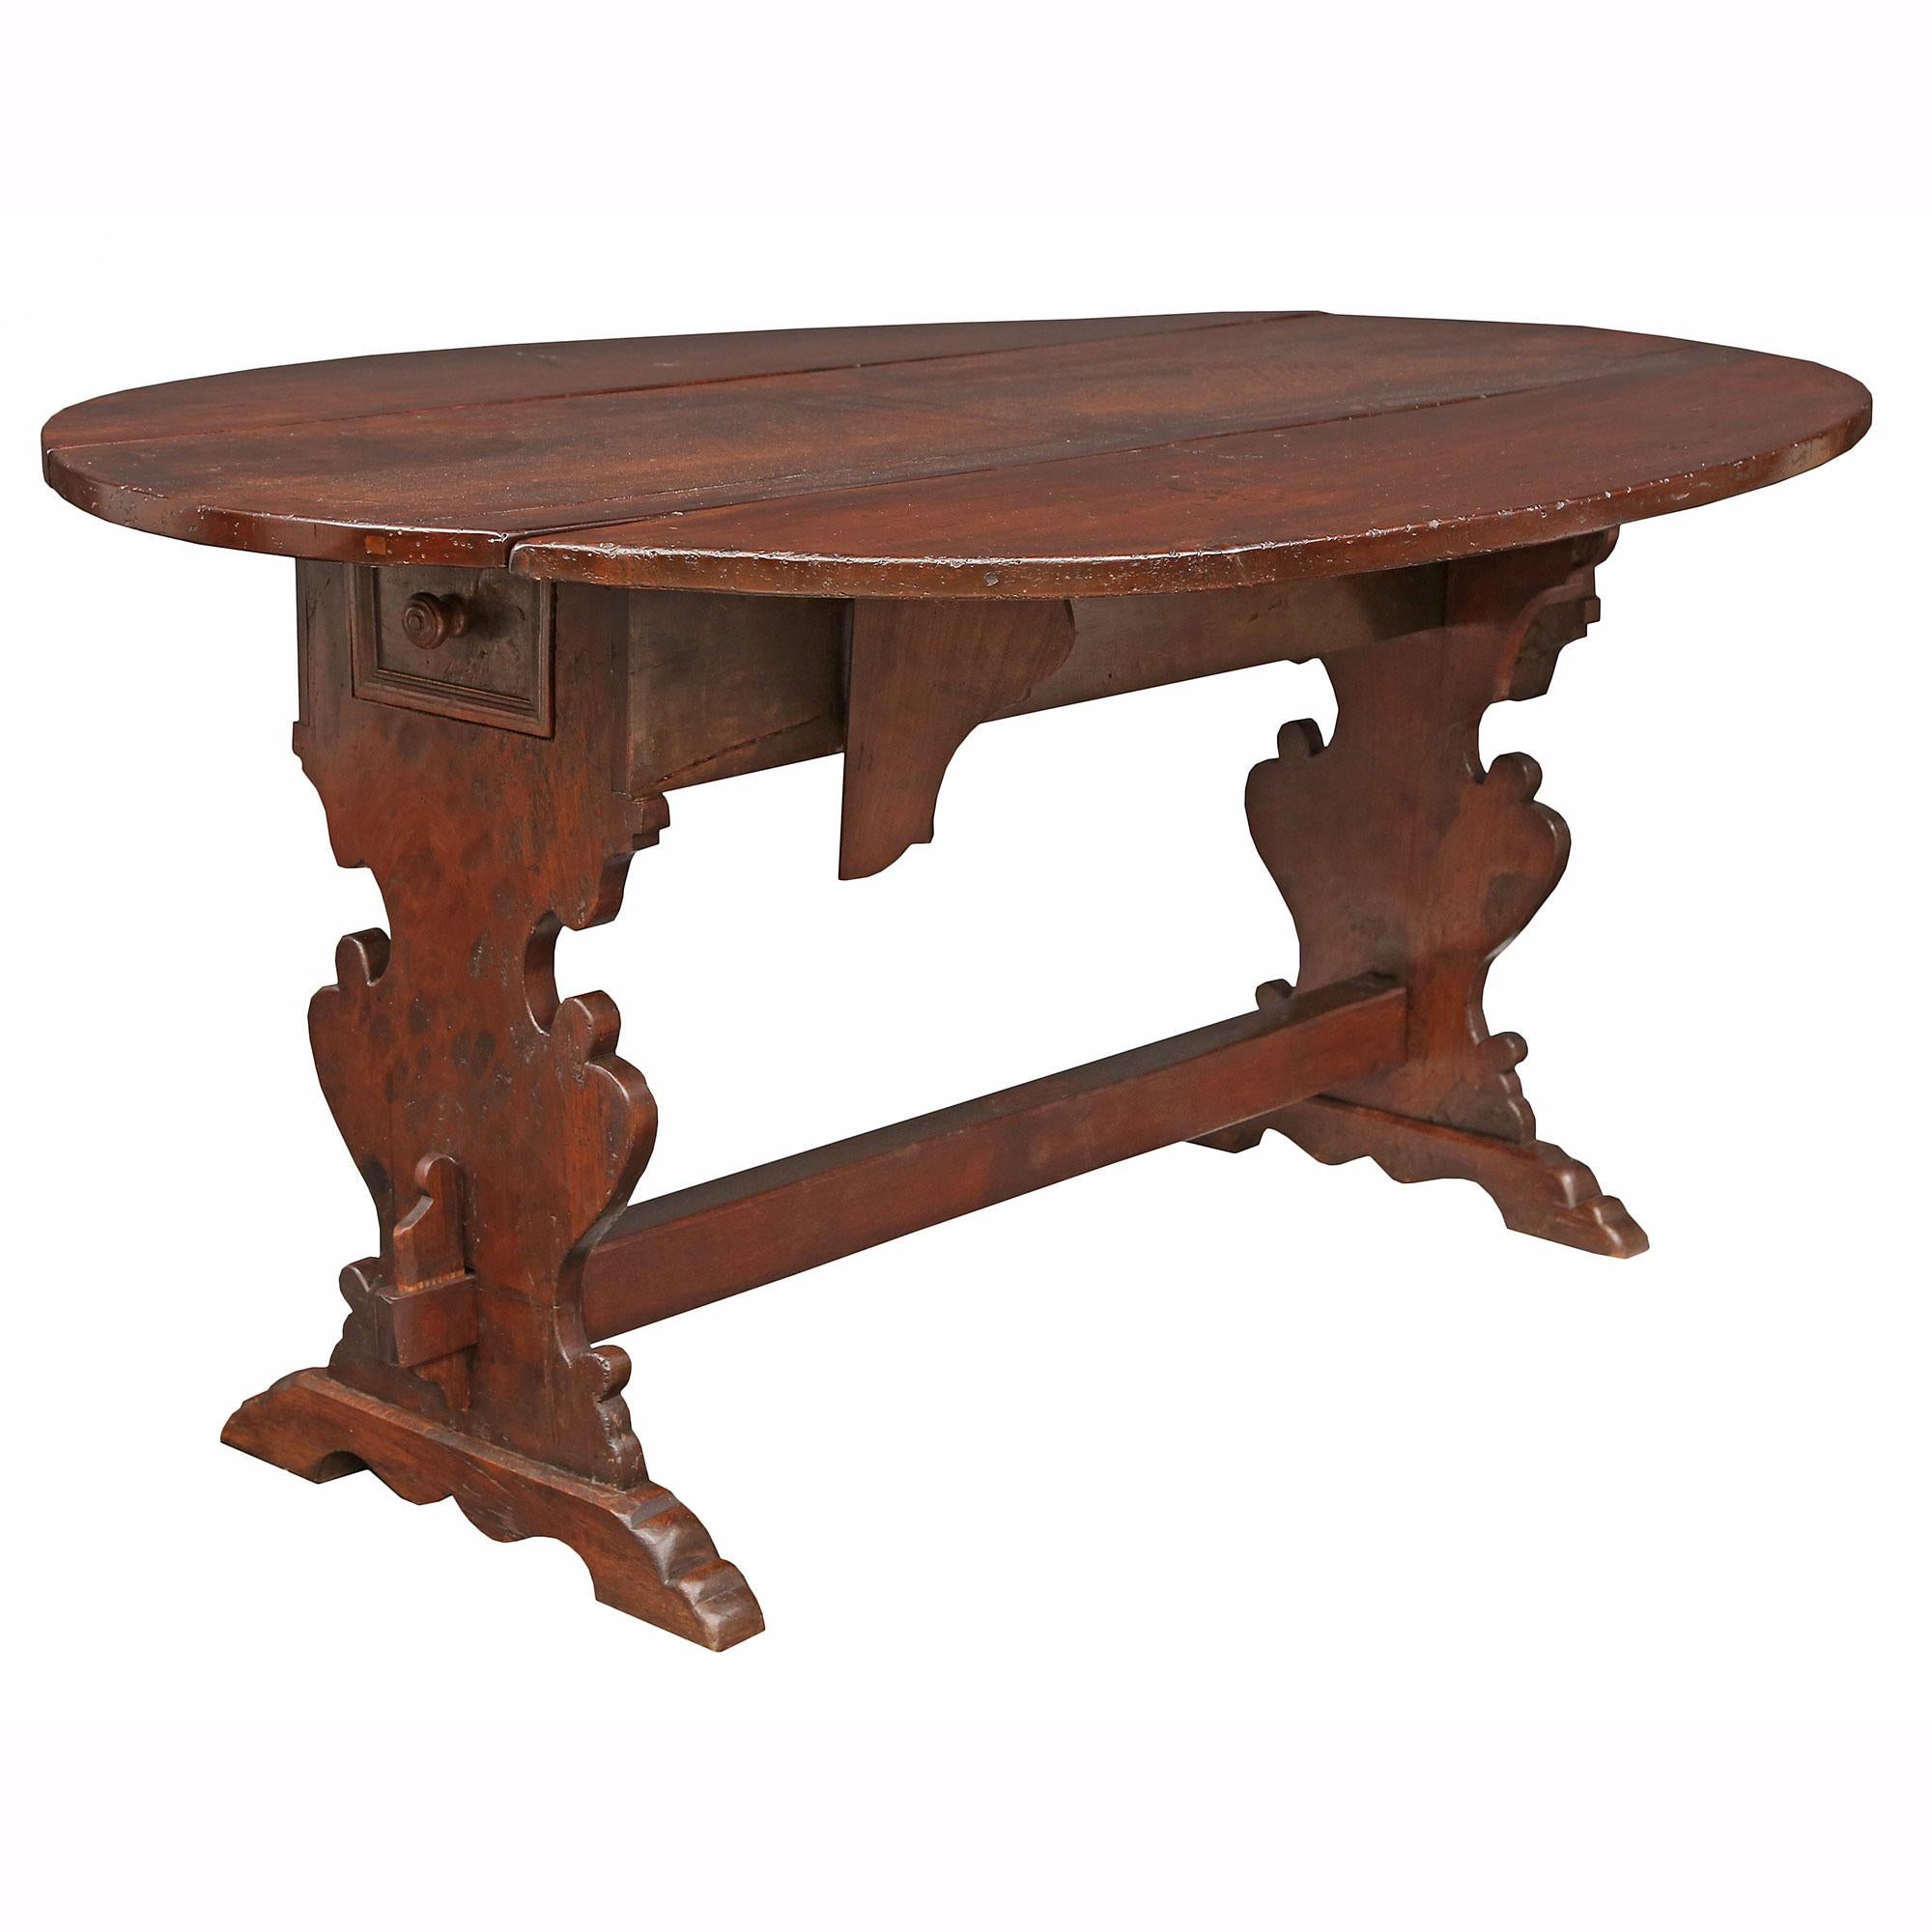 Italian 18th Century Solid Walnut Gateleg Table from Tuscany In Good Condition For Sale In West Palm Beach, FL